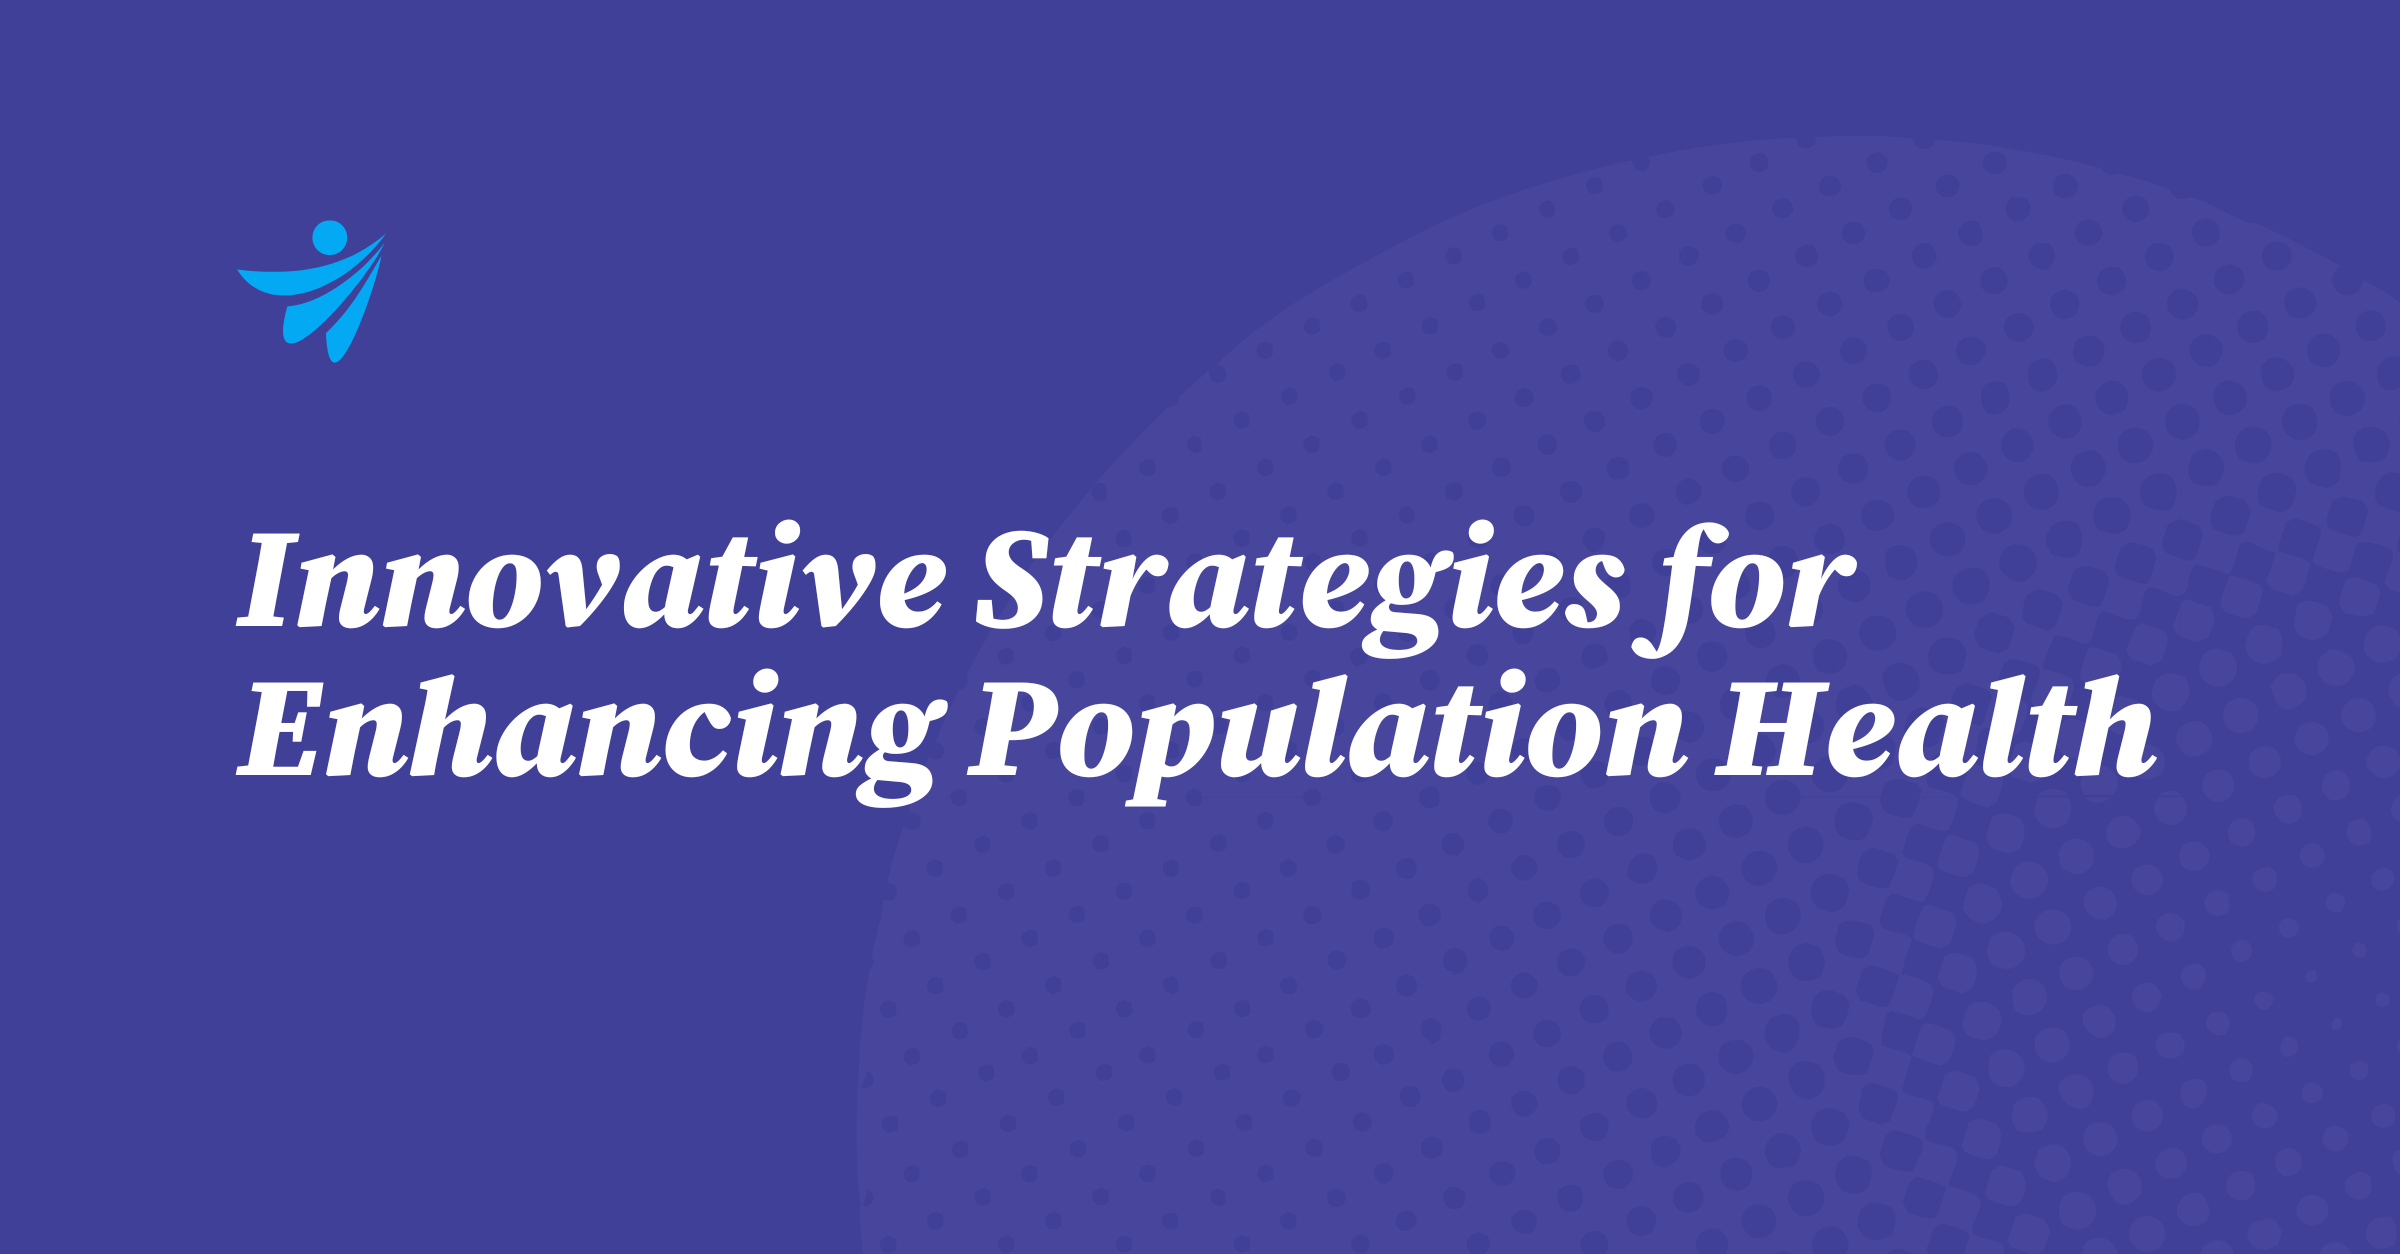 Thumbnail for Innovative Strategies for Enhancing Population Health